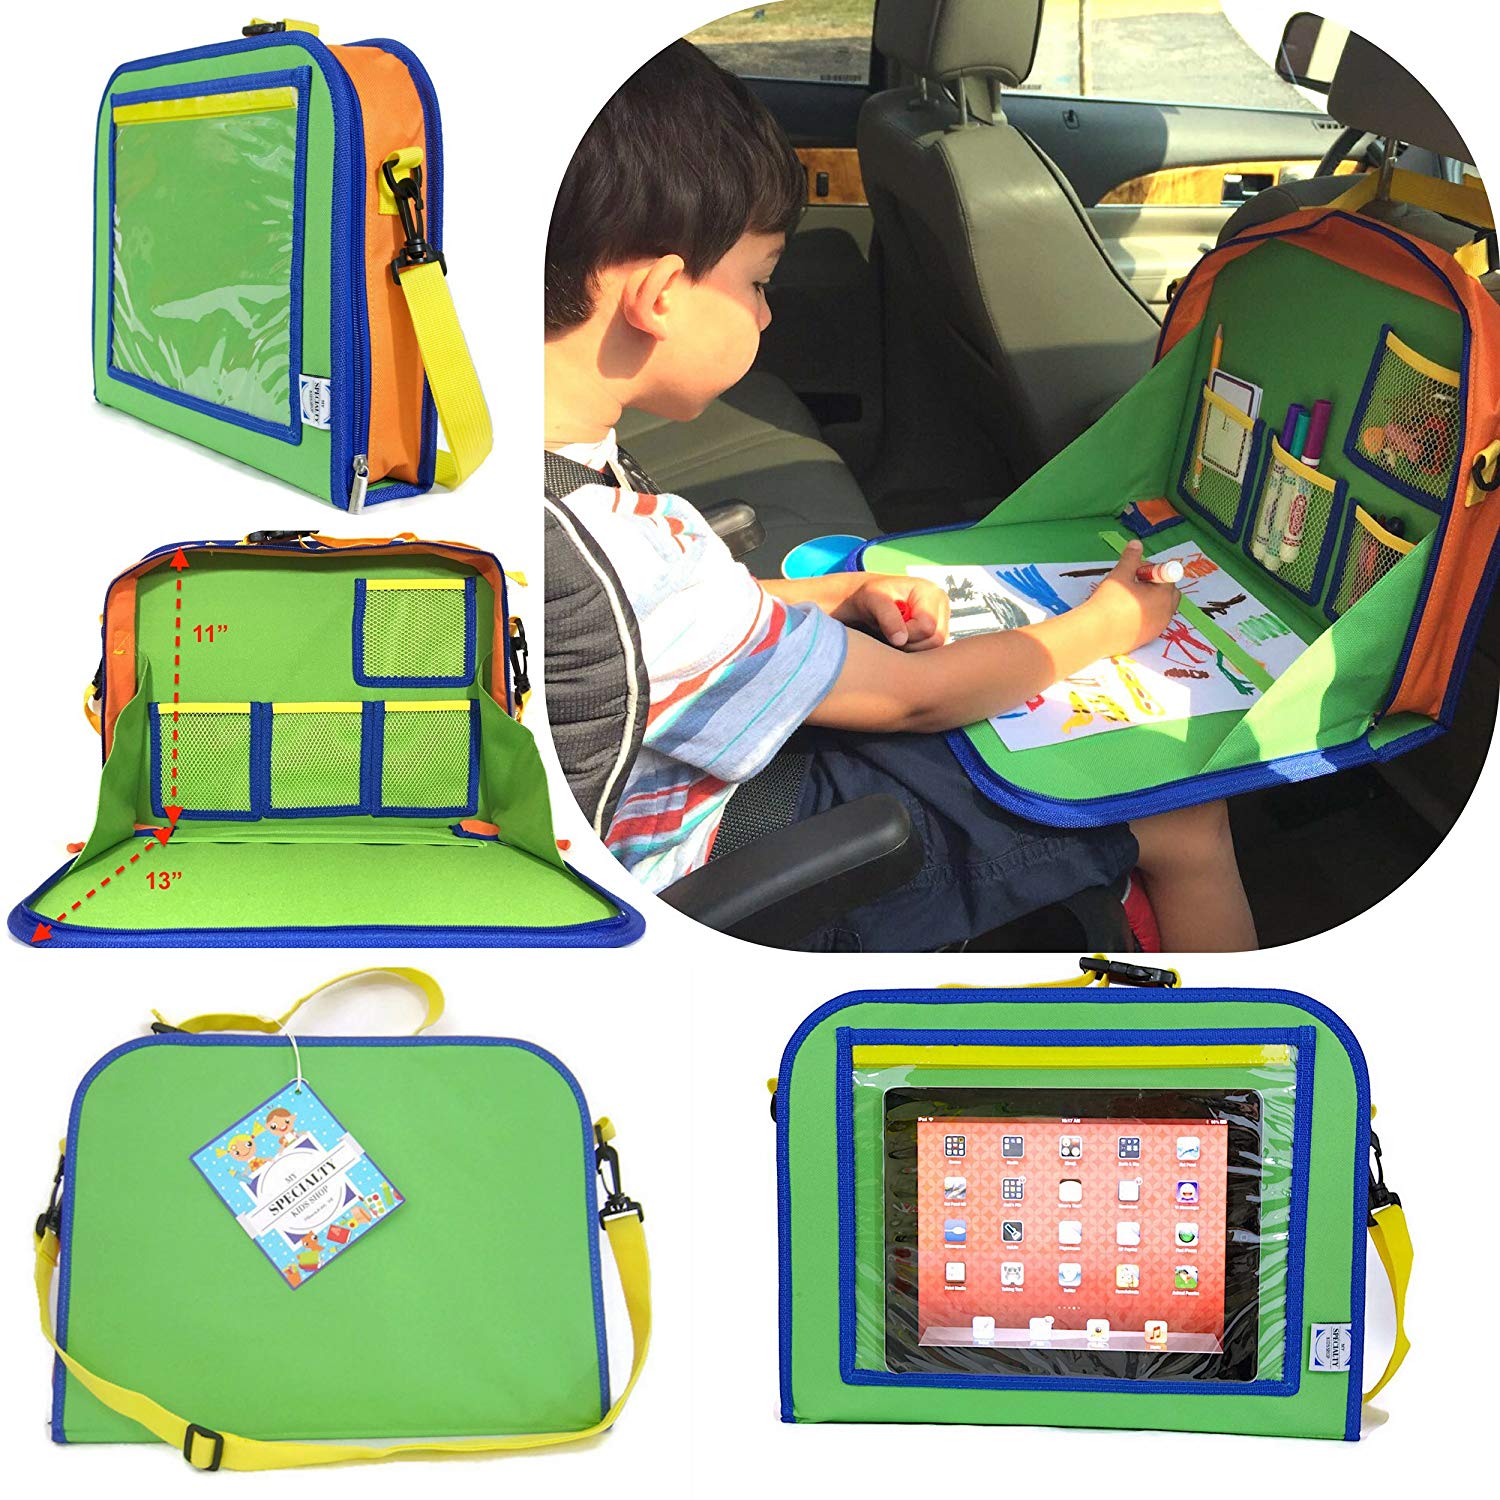 AIOIAI Kids Backseat Organizer Holds Crayons Markers an iPad Kindle or Other Tablet. Great for Road Trips and Travel used as a Lap Tray Writing Surface